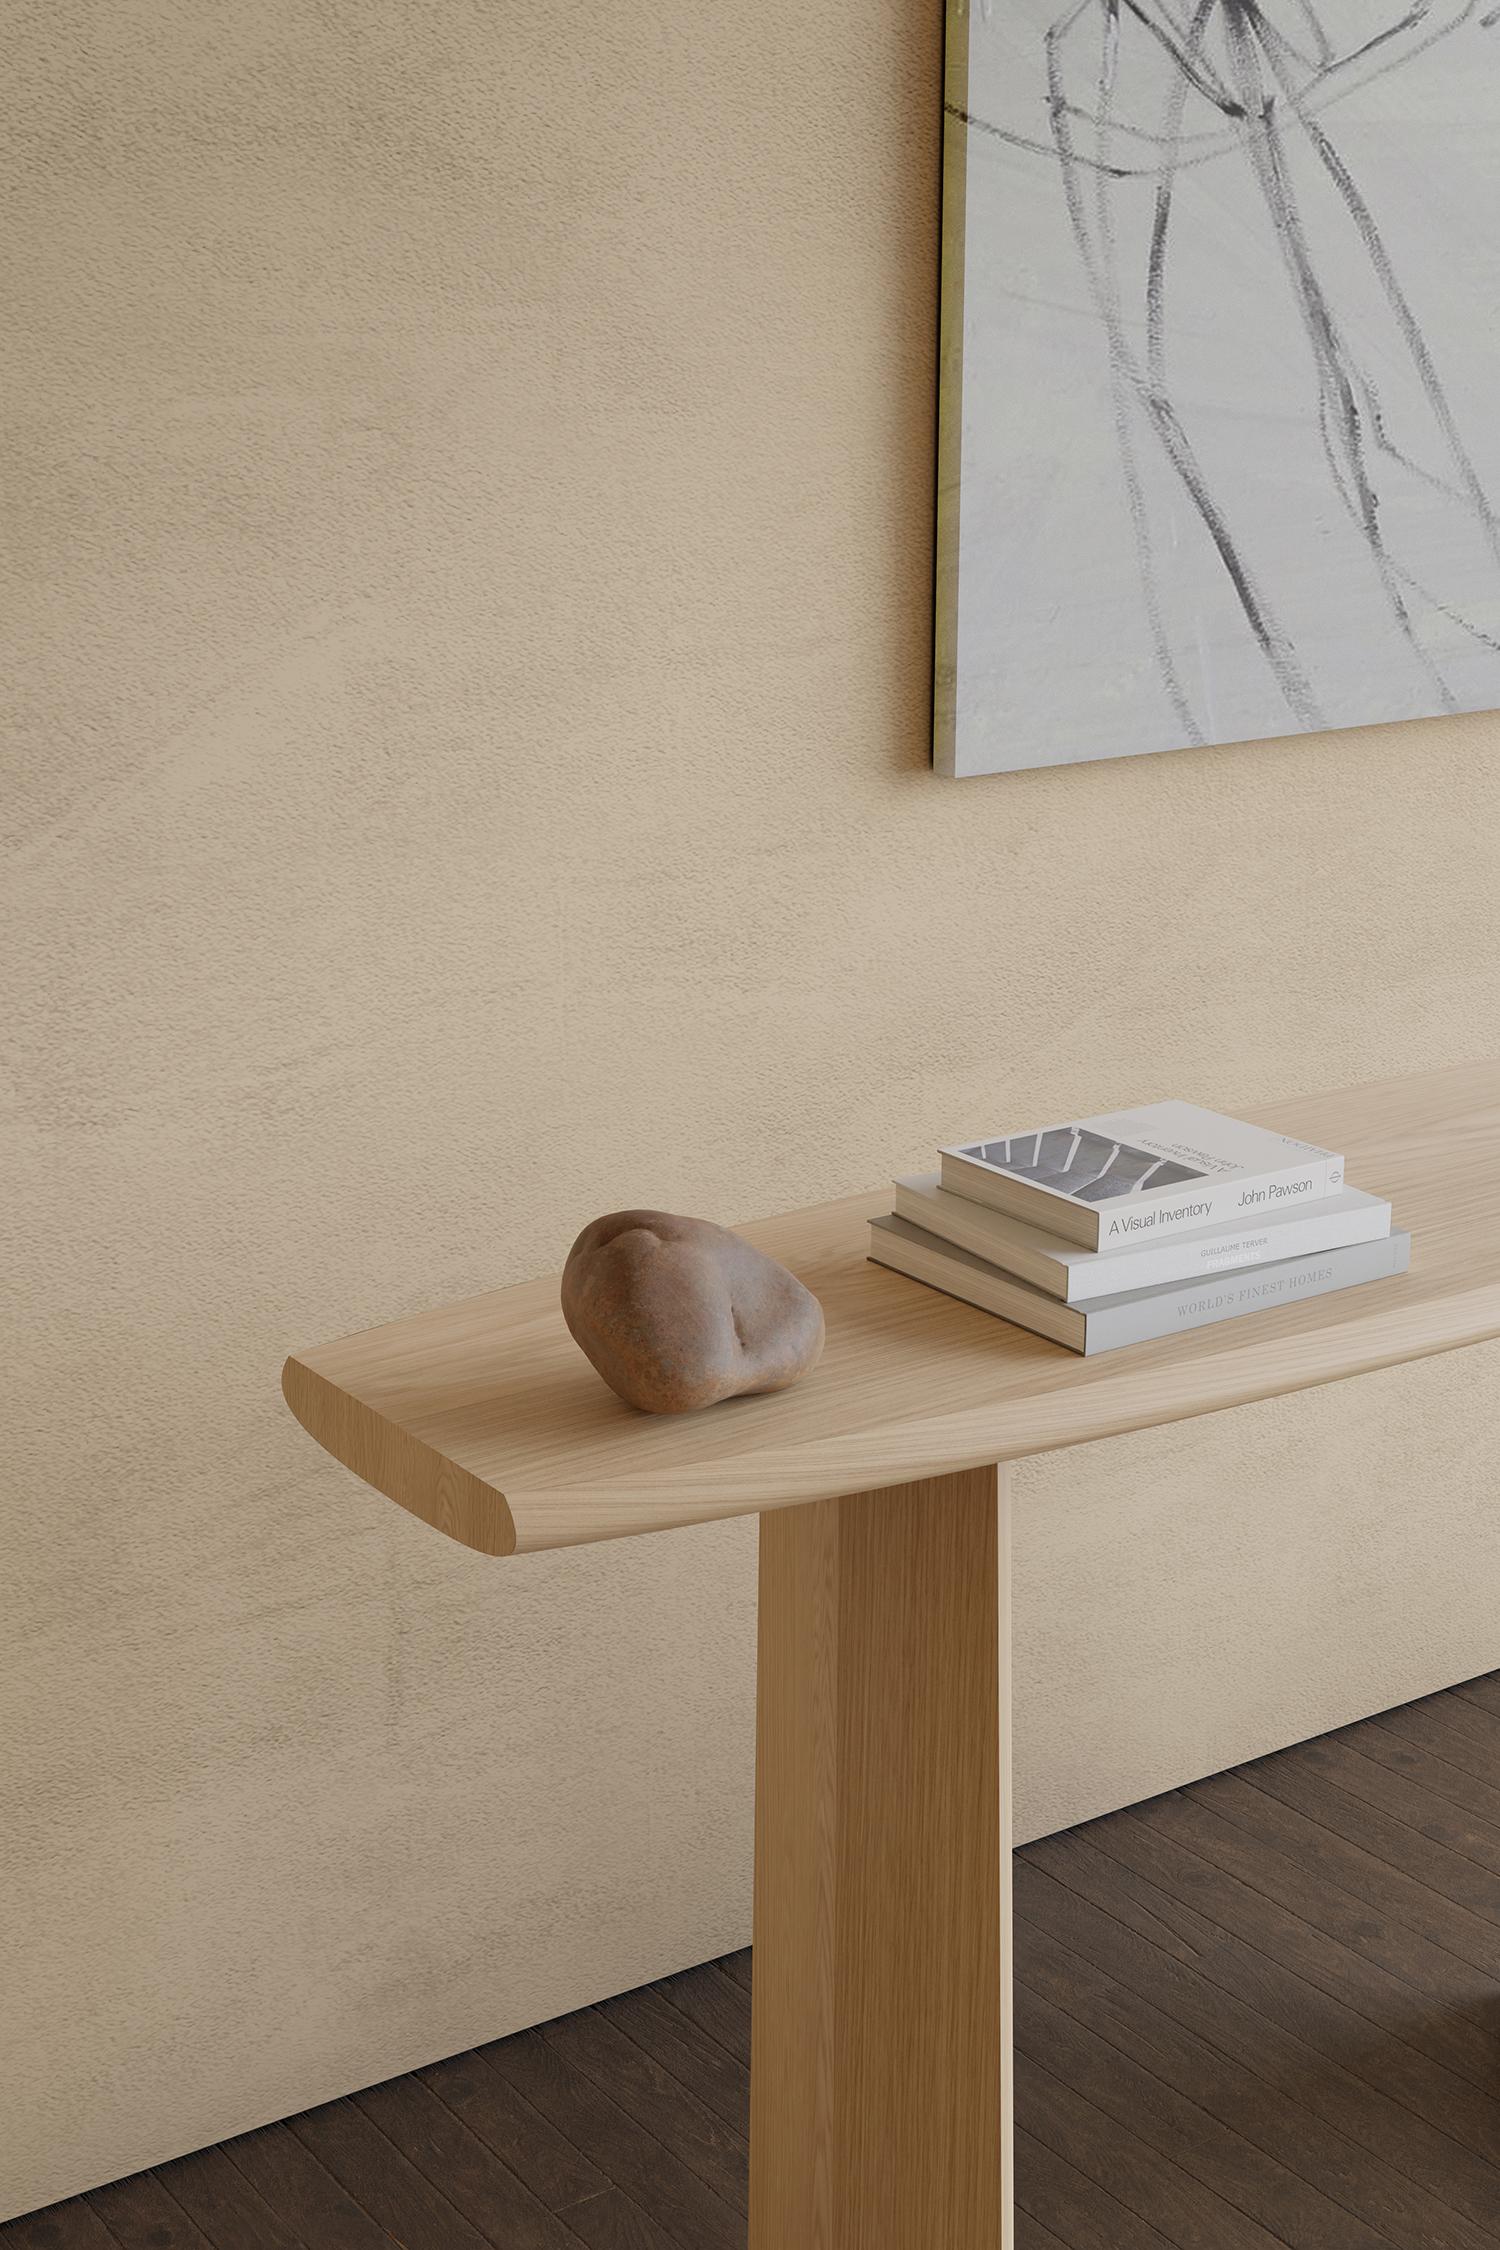 Peana Sideboard in Natural Oak Wood Finish, Console Table by Joel Escalona (Mexikanisch) im Angebot